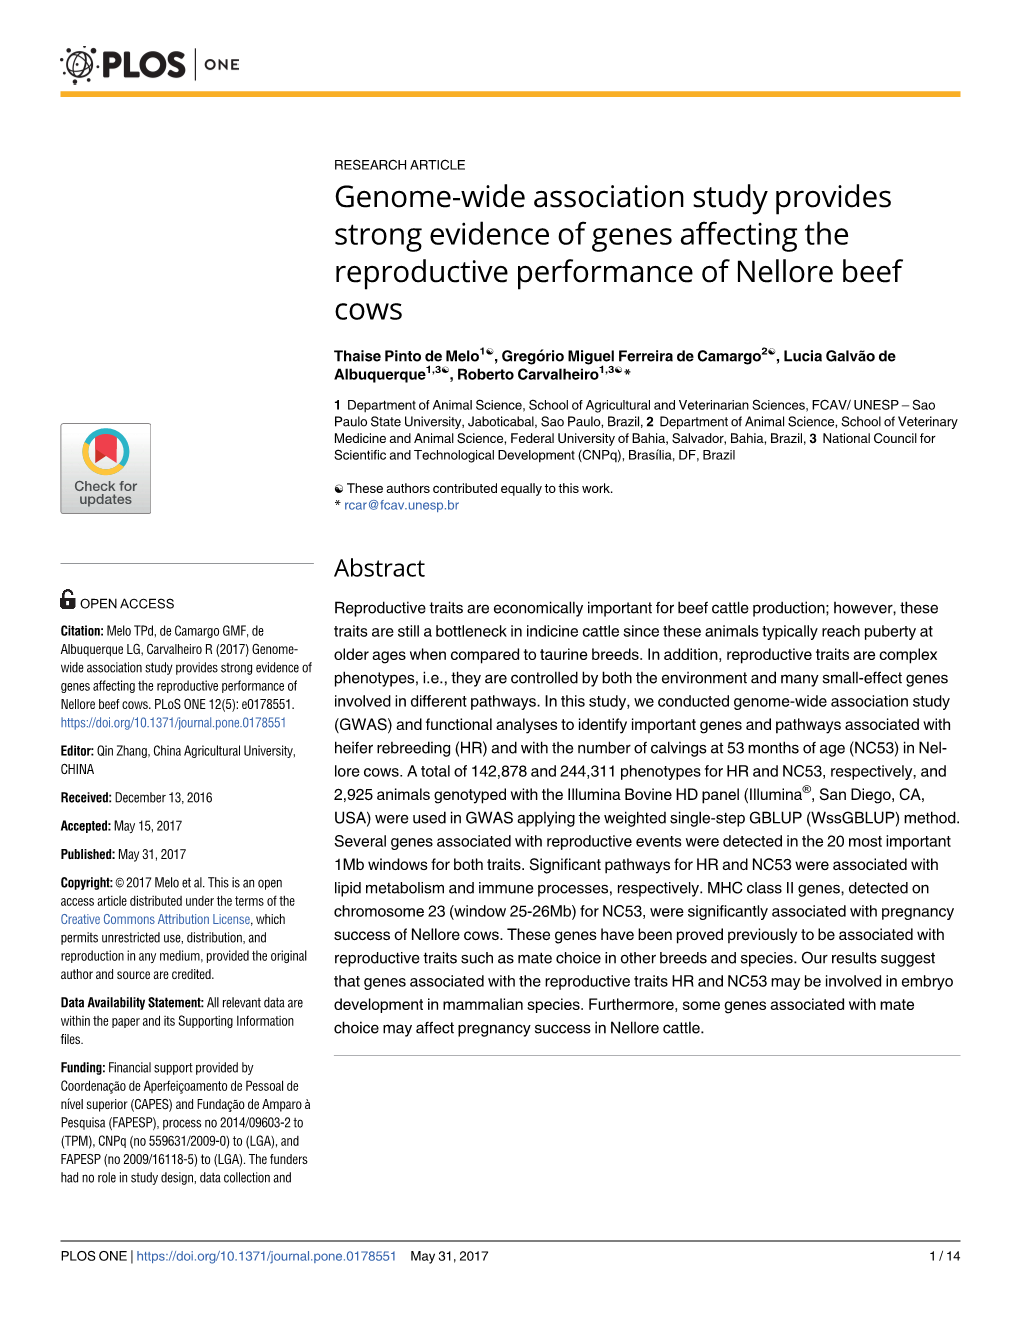 Genome-Wide Association Study Provides Strong Evidence of Genes Affecting the Reproductive Performance of Nellore Beef Cows